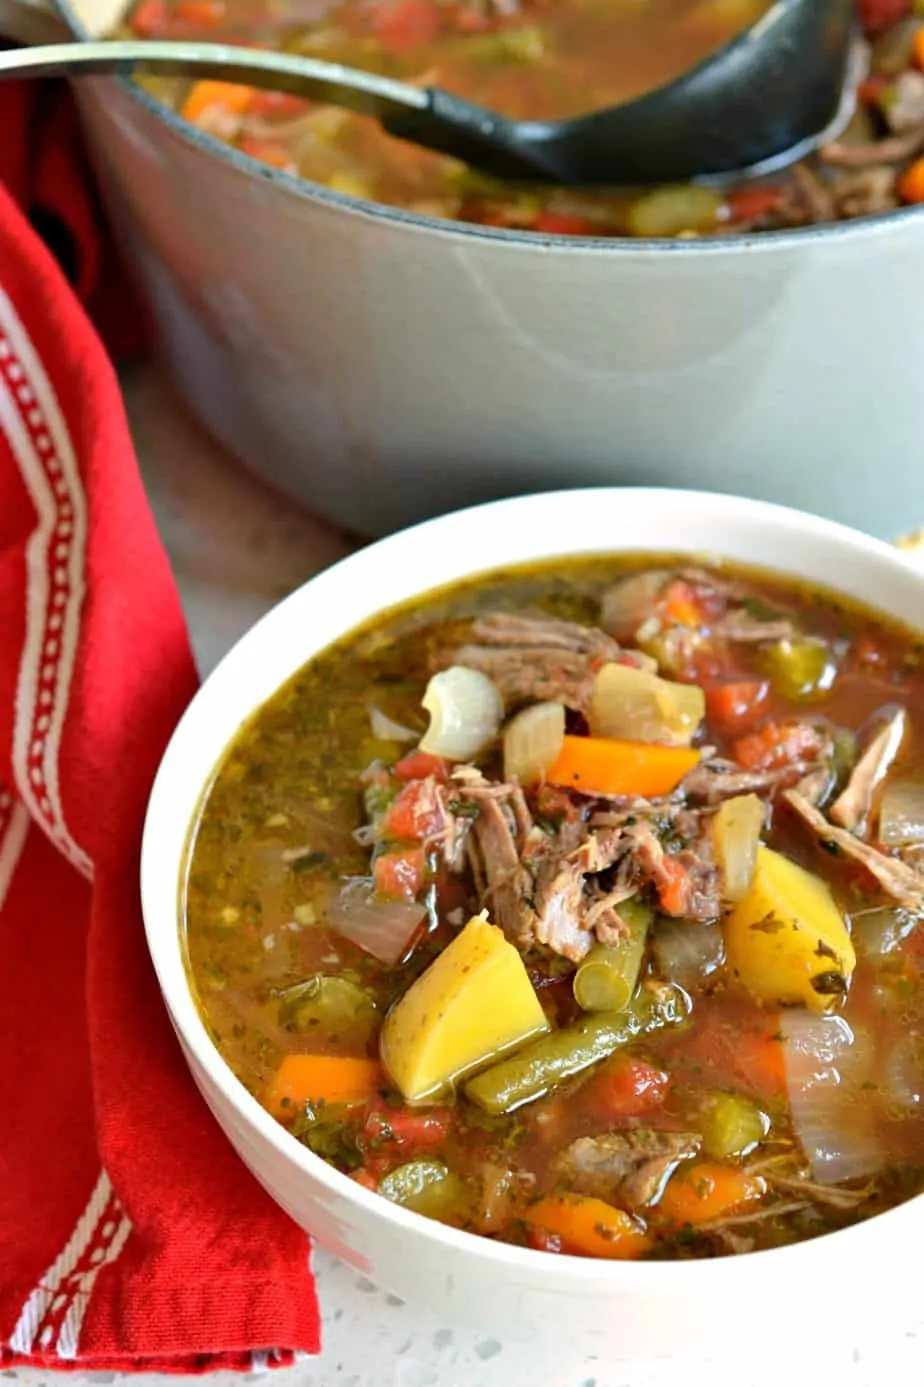 I like to make this Vegetable Beef Soup with a slow simmered chuck roast. 